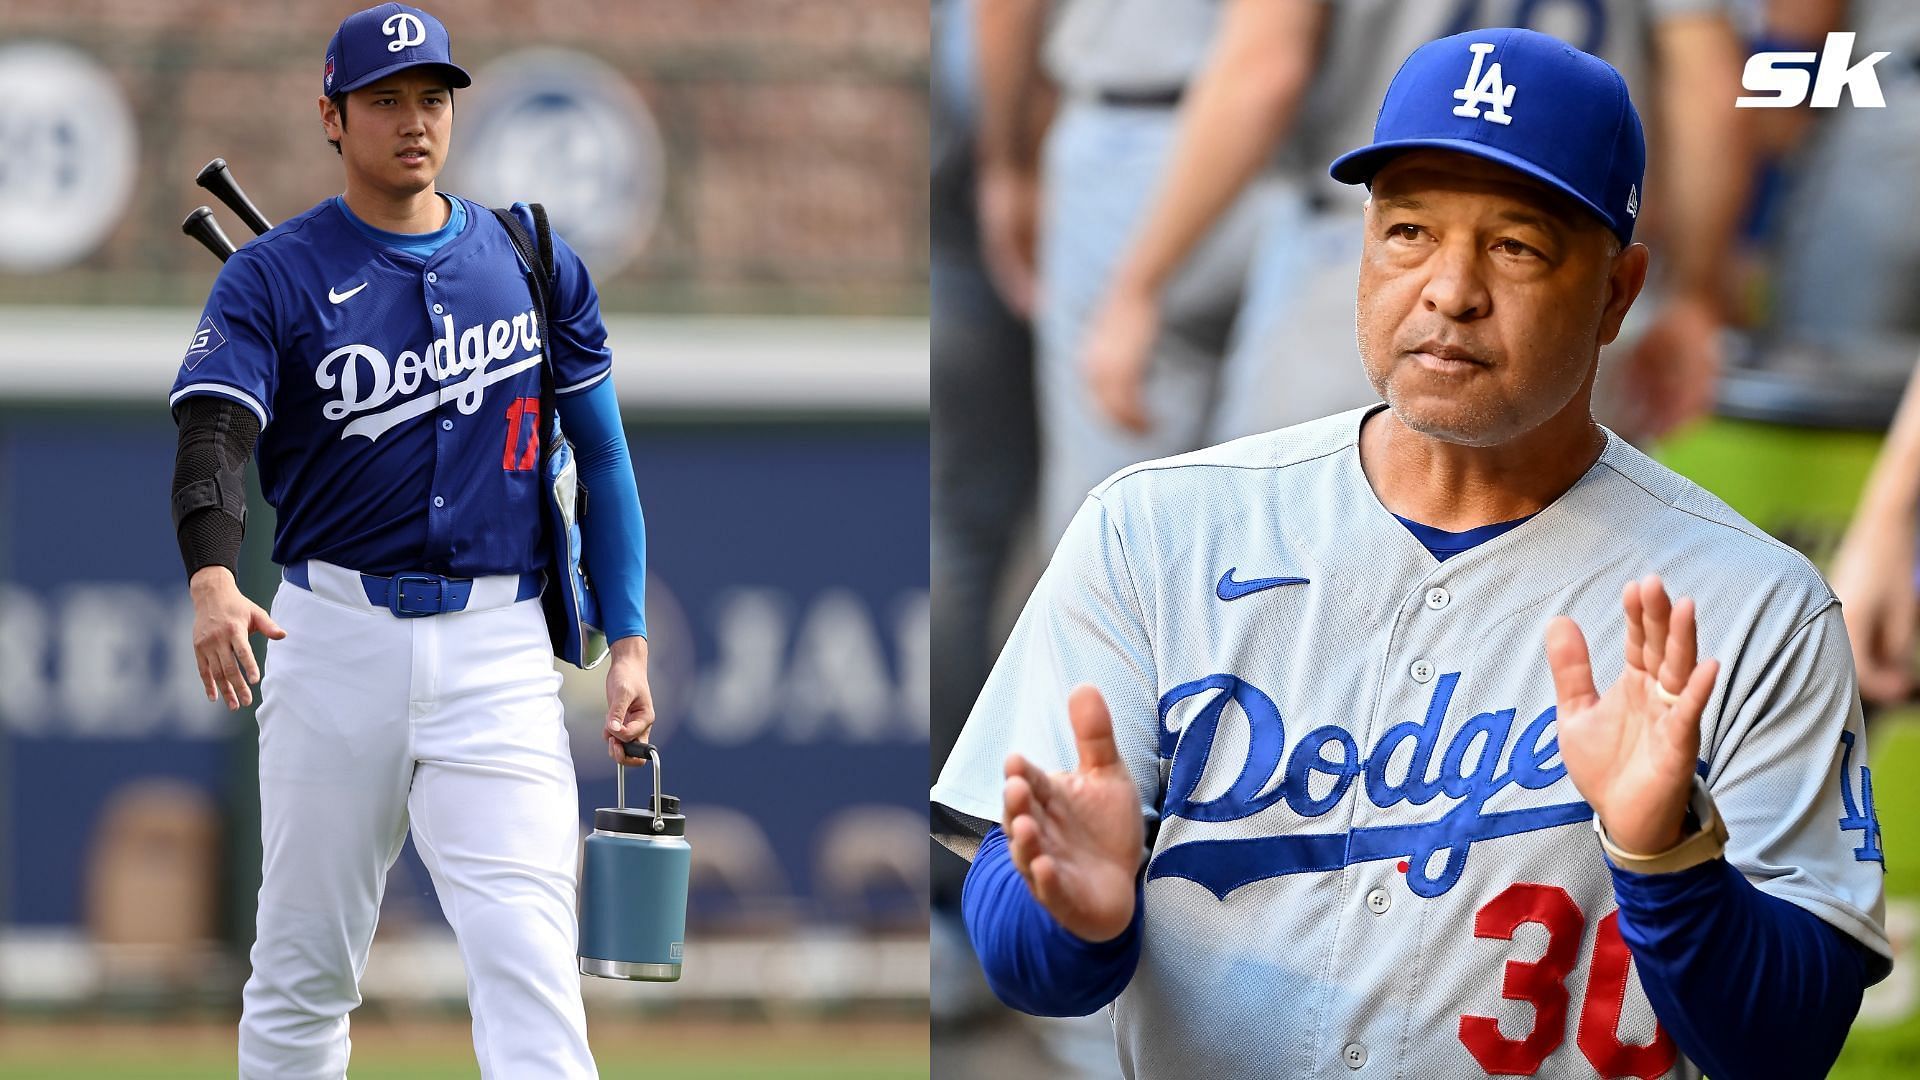 Dodgers manager Dave Roberts was among those taken by surprise by Shohei Ohtani